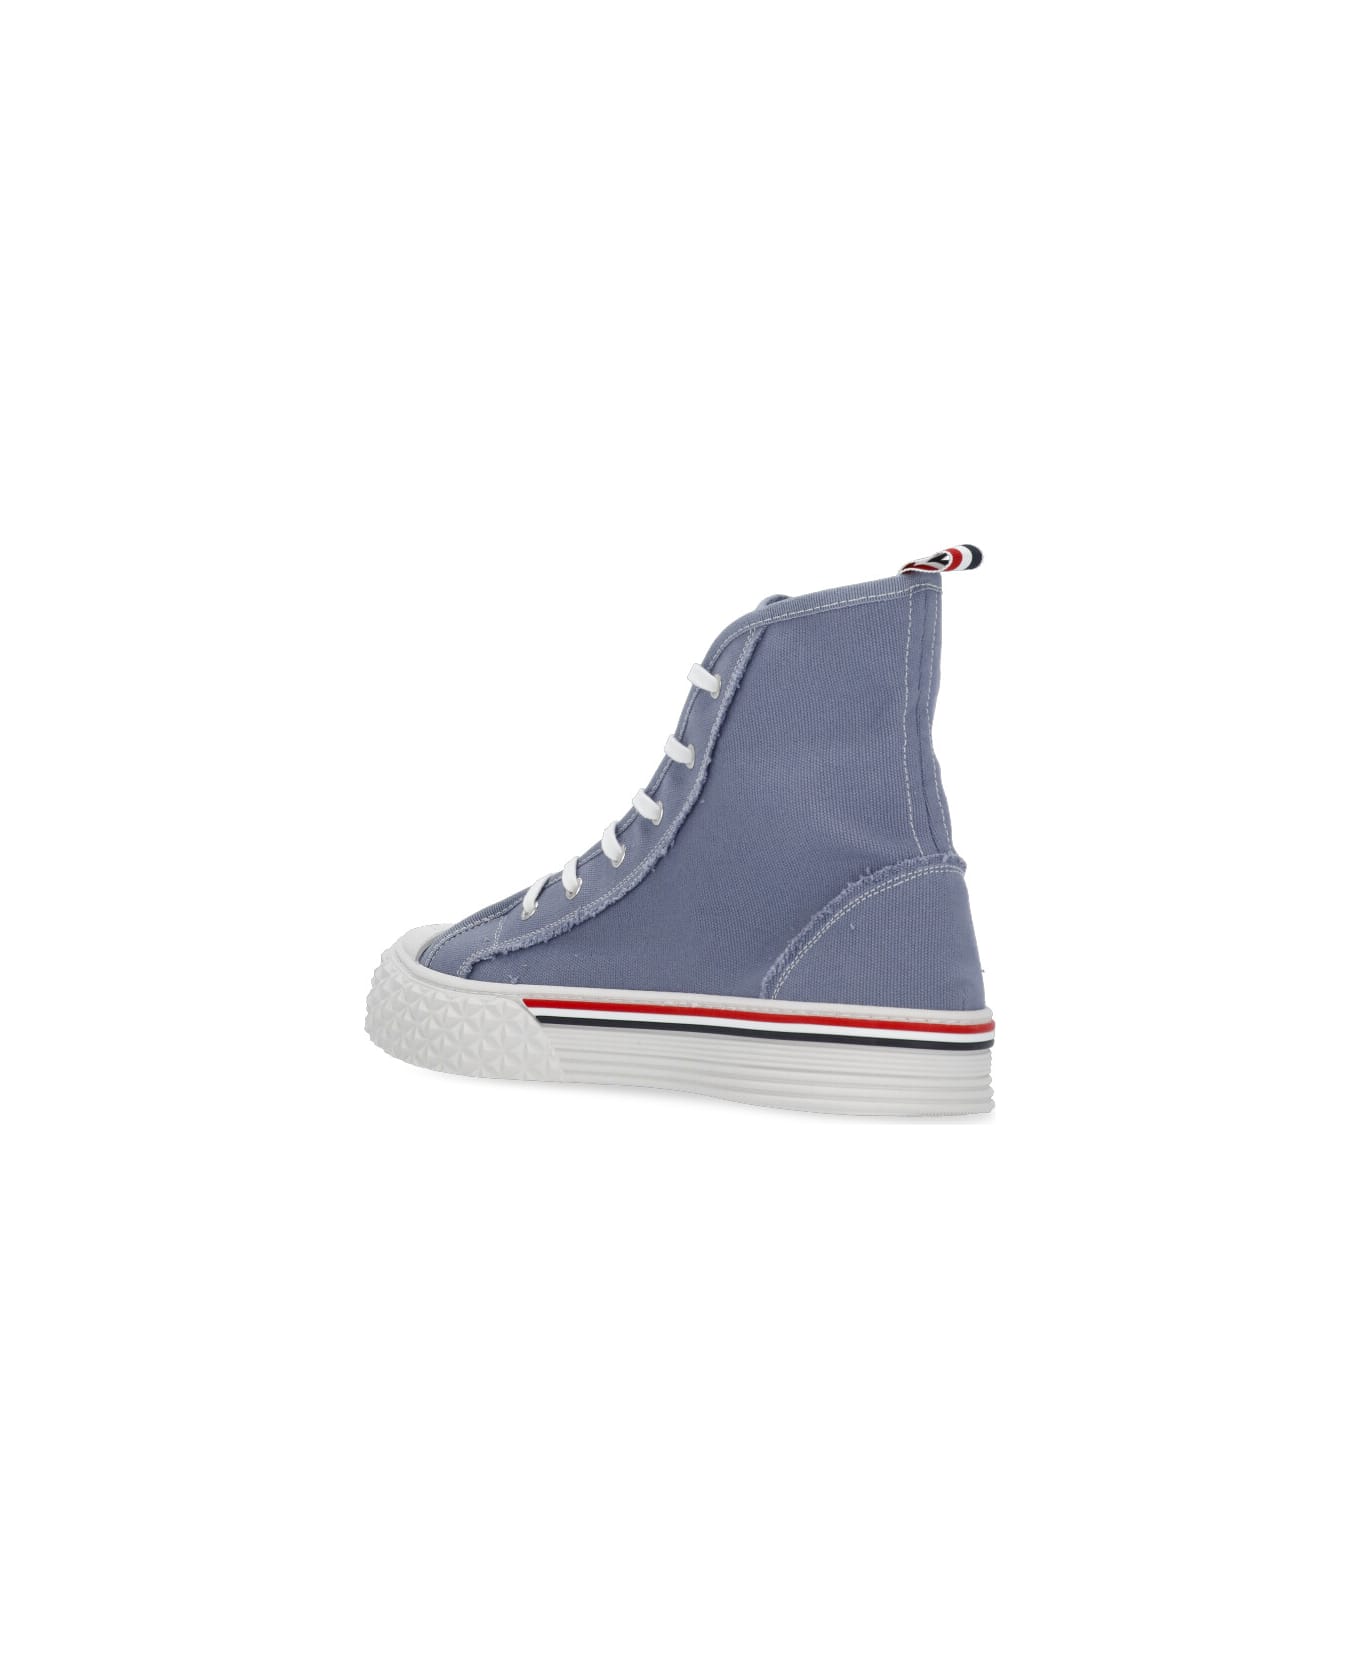 Thom Browne Sneakers In Light Blue Canvas - Light Blue